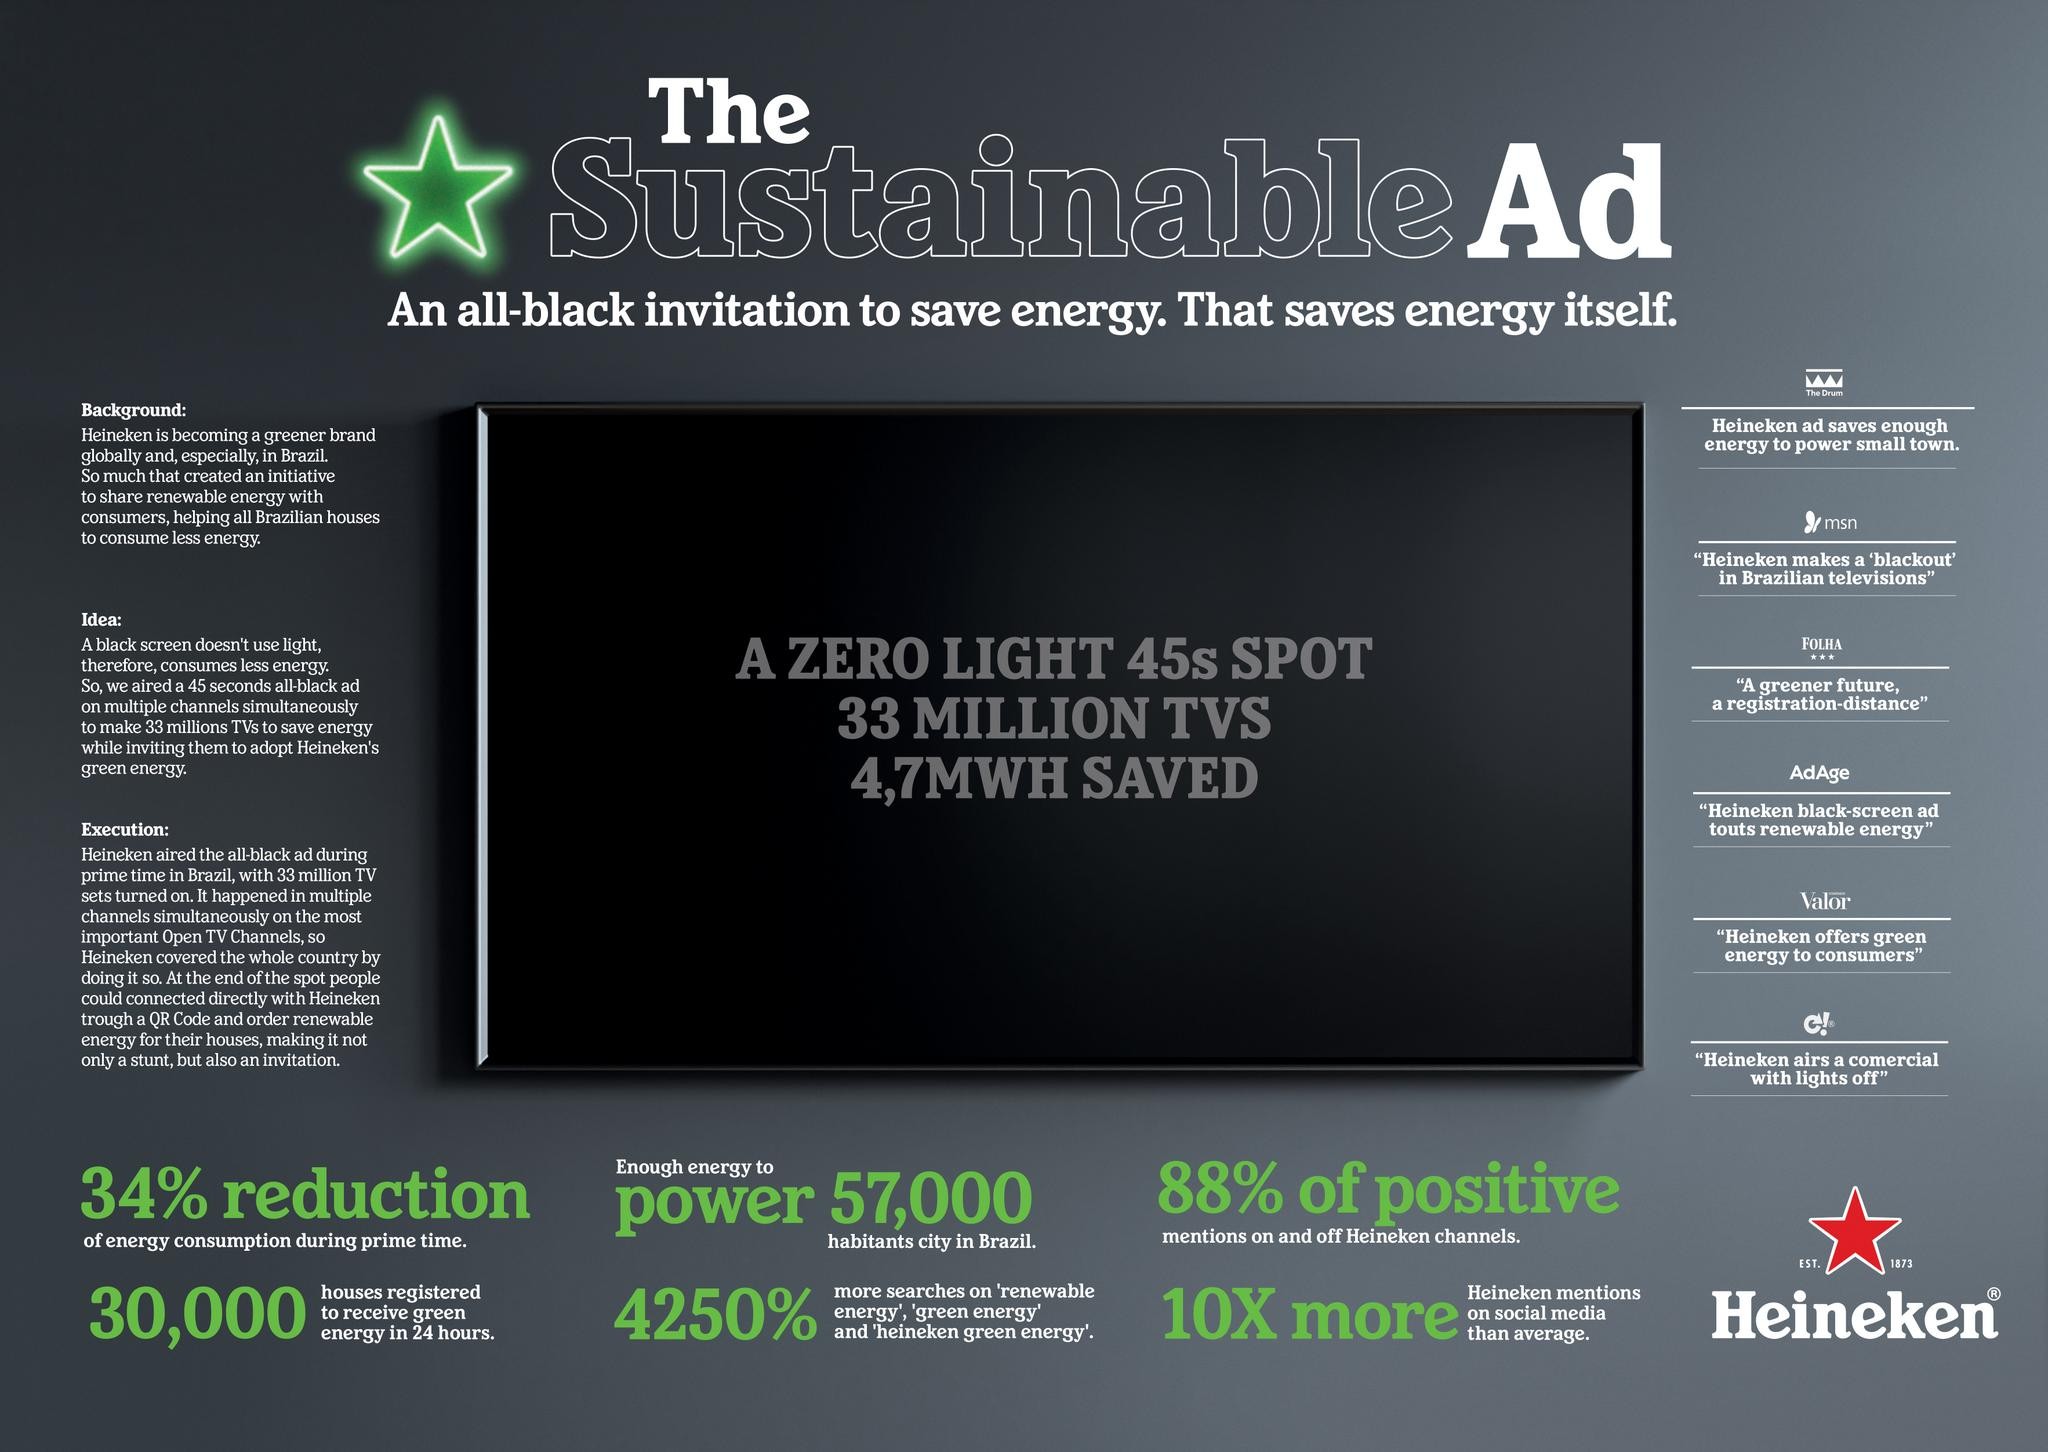 The Sustainable Ad